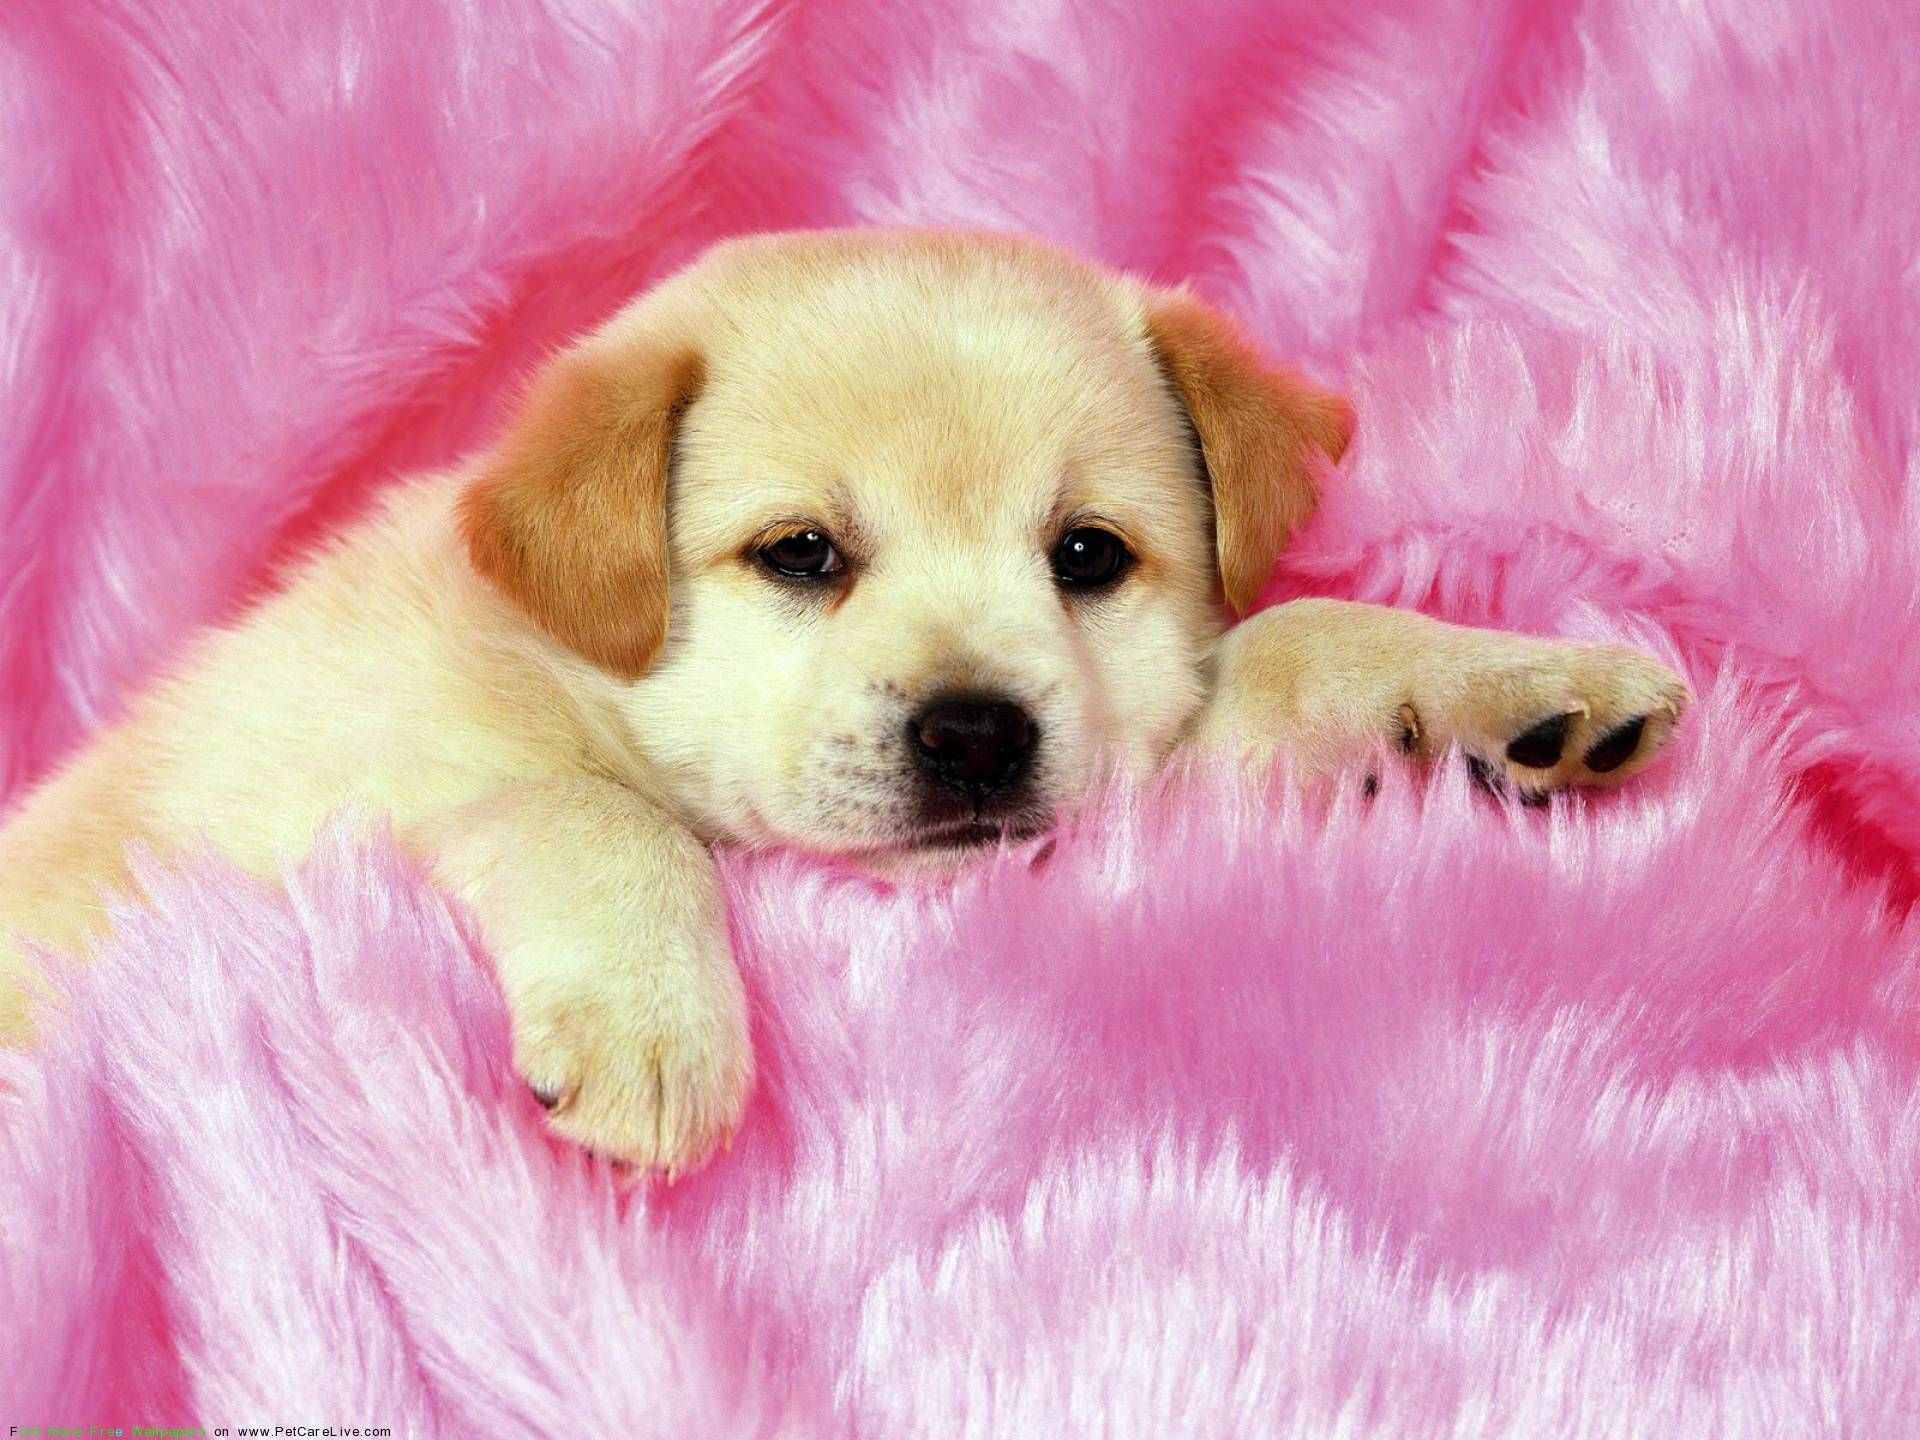 1920x1440 Cute Dogs And Puppies Wallpaper | Cute puppy wallpaper, Puppy wallpaper, Cute dog wallpaper